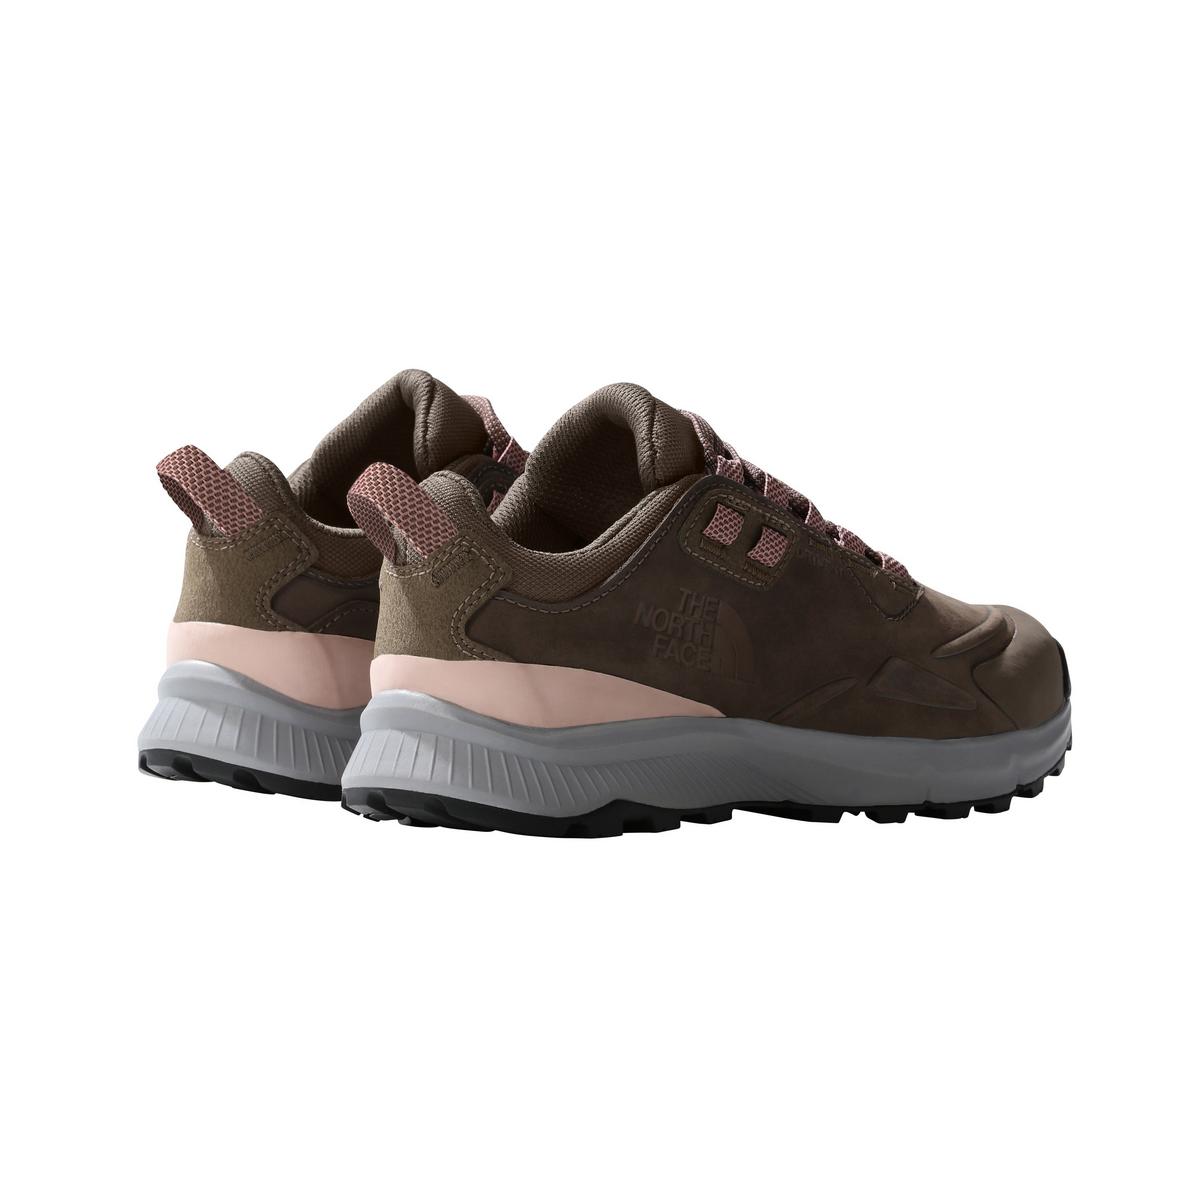 The North Face Women's Cragstone Waterproof Hiking Shoes - Brown